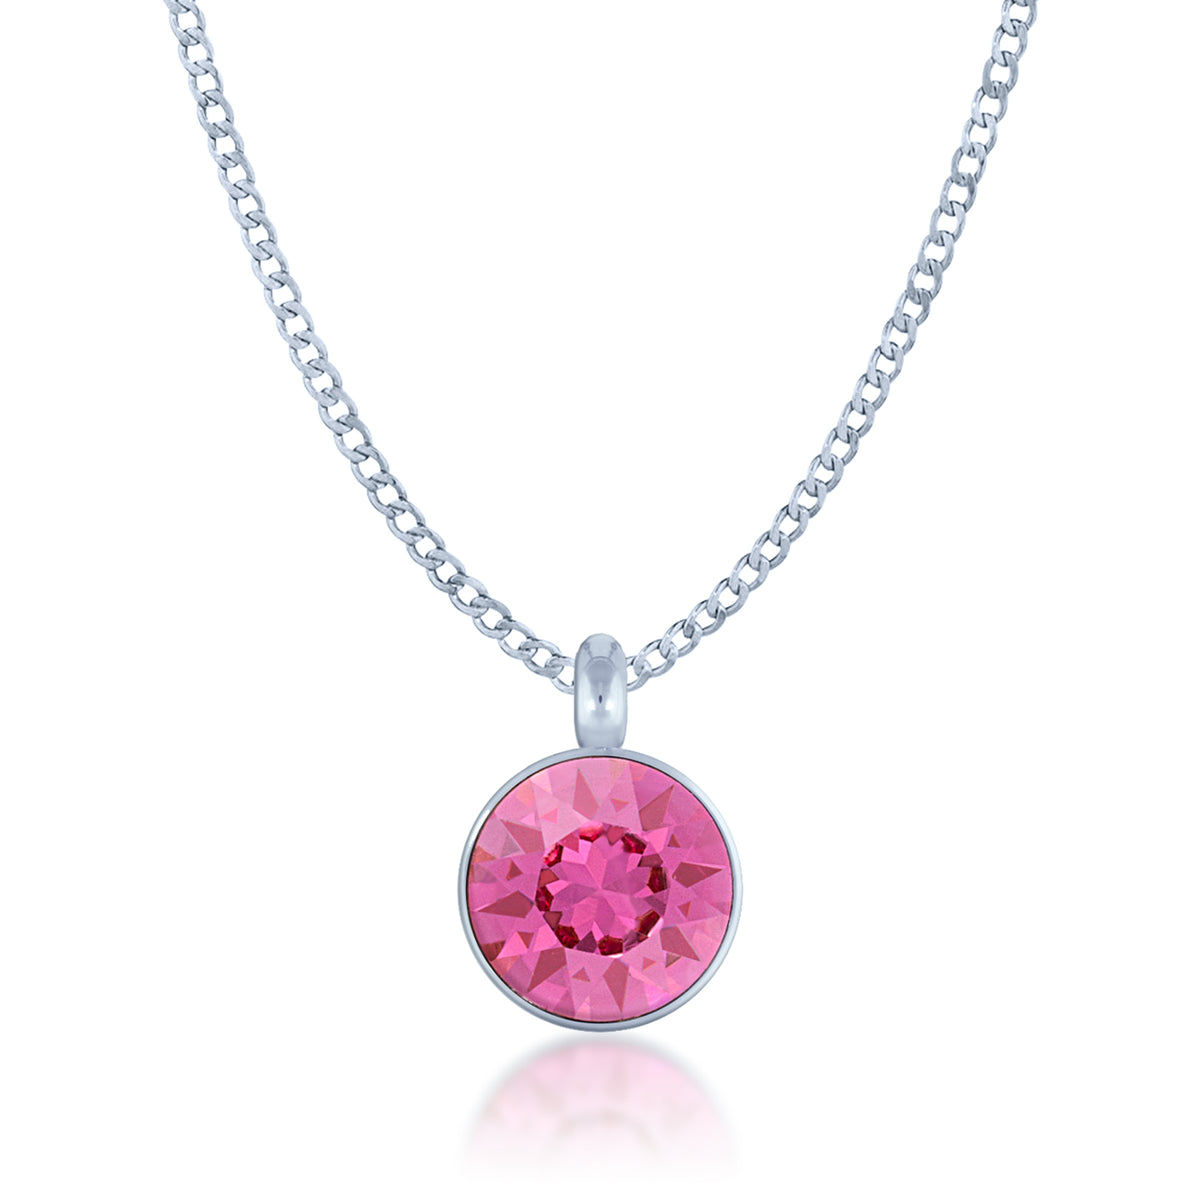 Bella Pendant Necklace with Pink Rose Round Crystals from Swarovski Silver Toned Rhodium Plated - Ed Heart